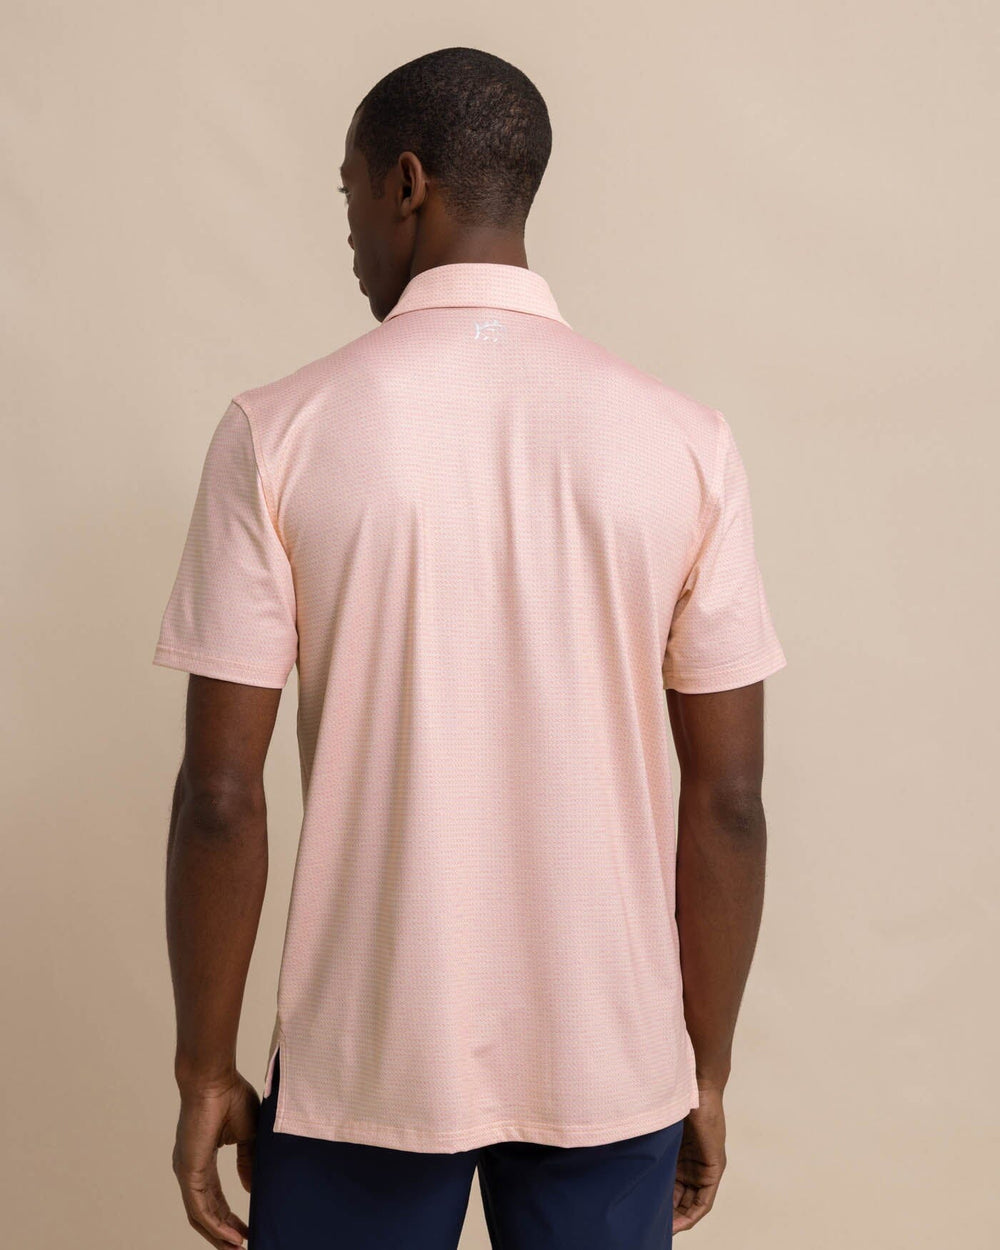 The back view of the Southern Tide Driver Getting Ziggy With It Printed Polo by Southern Tide - Apricot Blush Coral